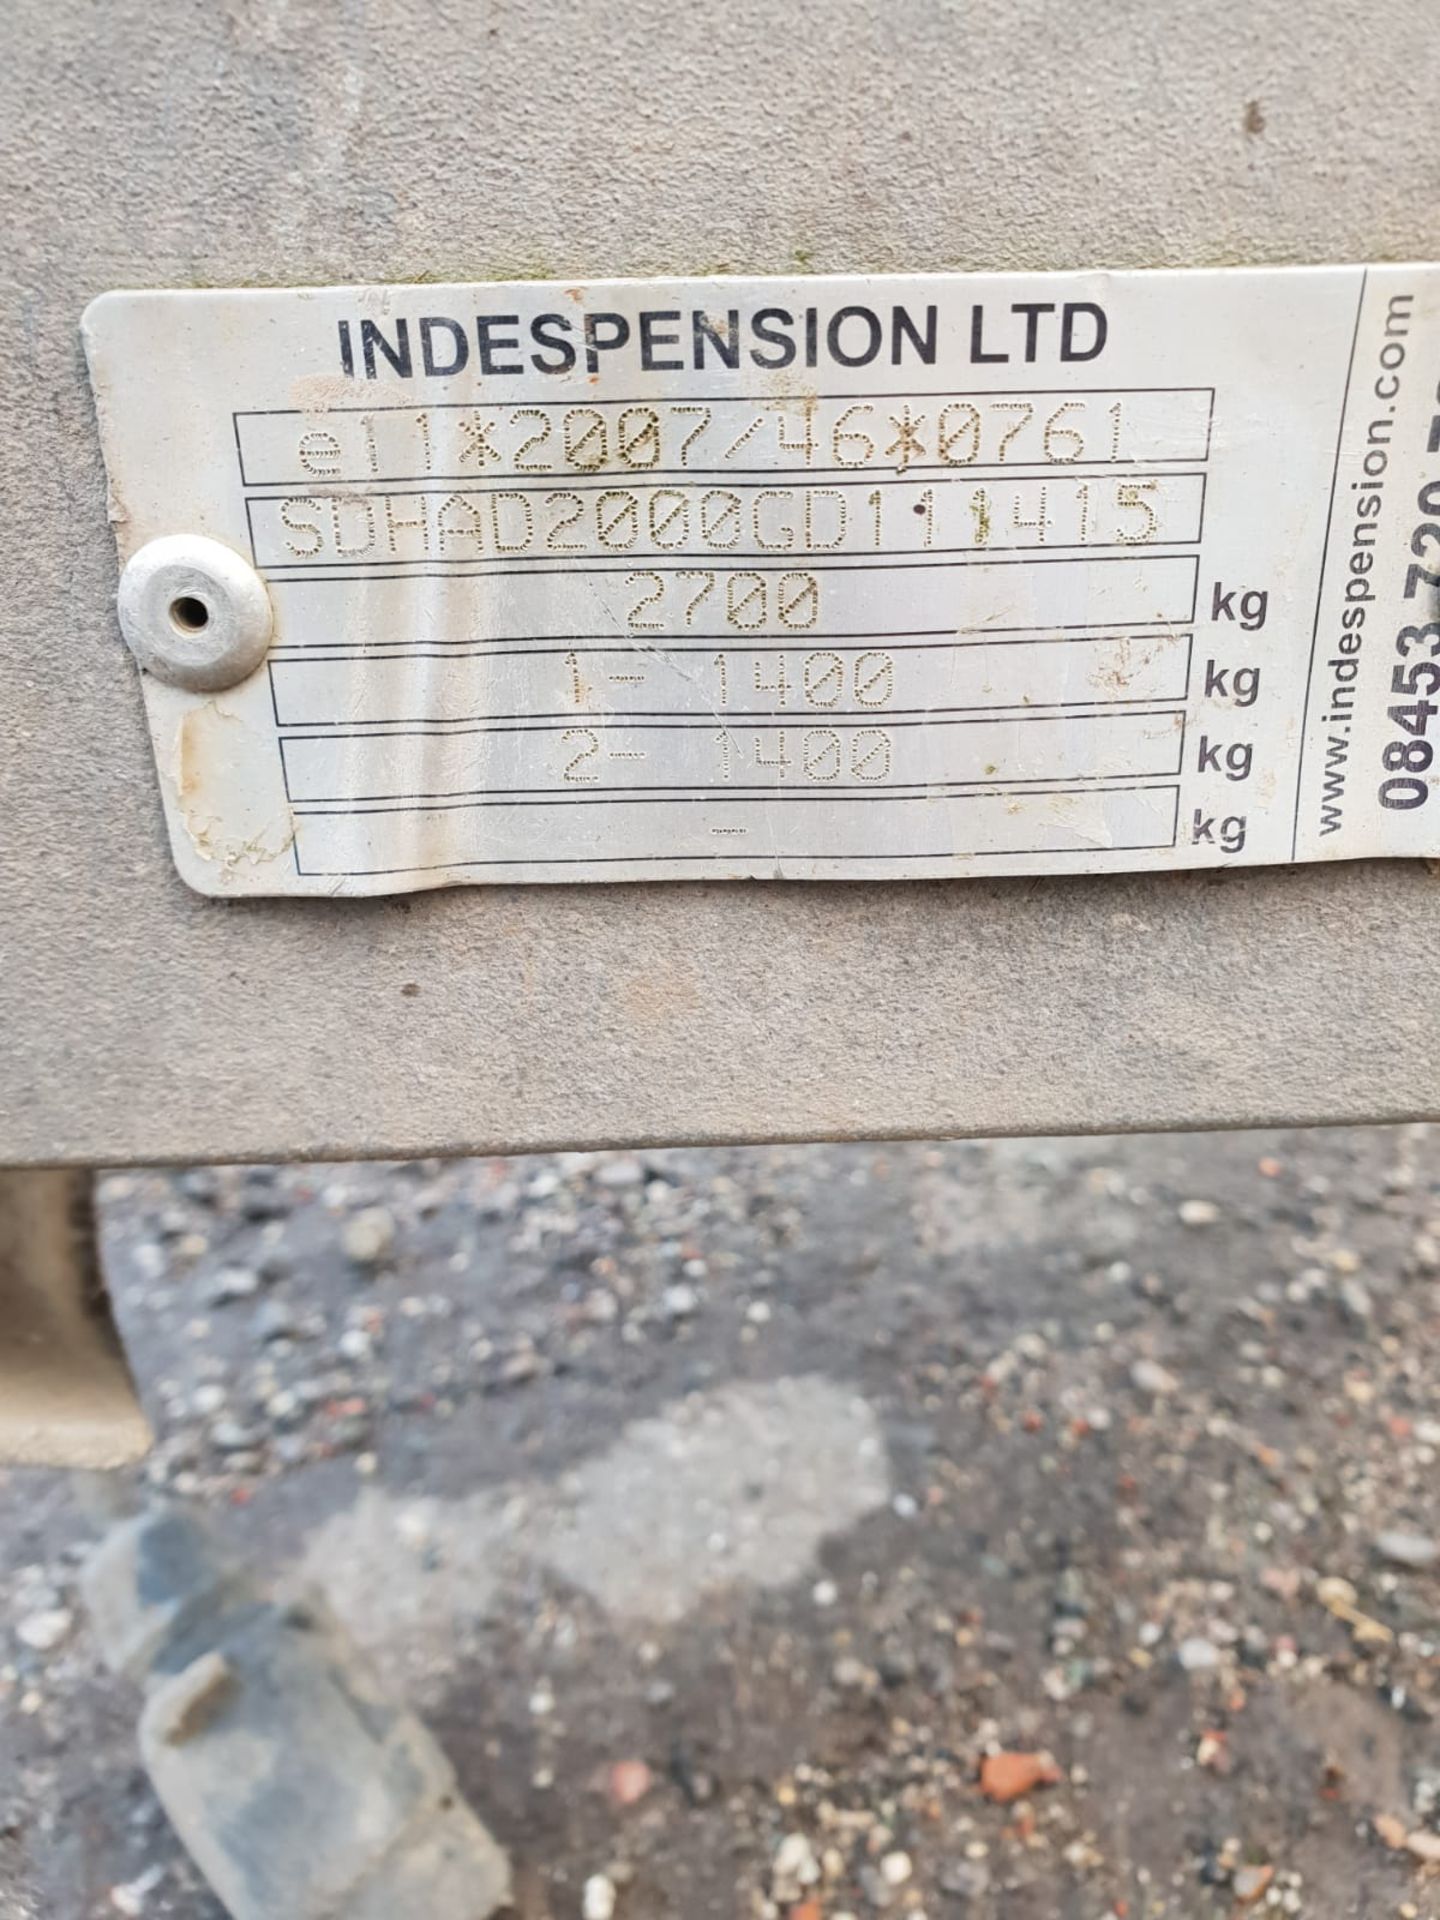 INDESPENSION TWIN AXLE MINI DIGGER PLANT TRAILER GOOD CONDITION SOLID FLOOR, GOOD TYRES *NO VAT* - Image 7 of 7